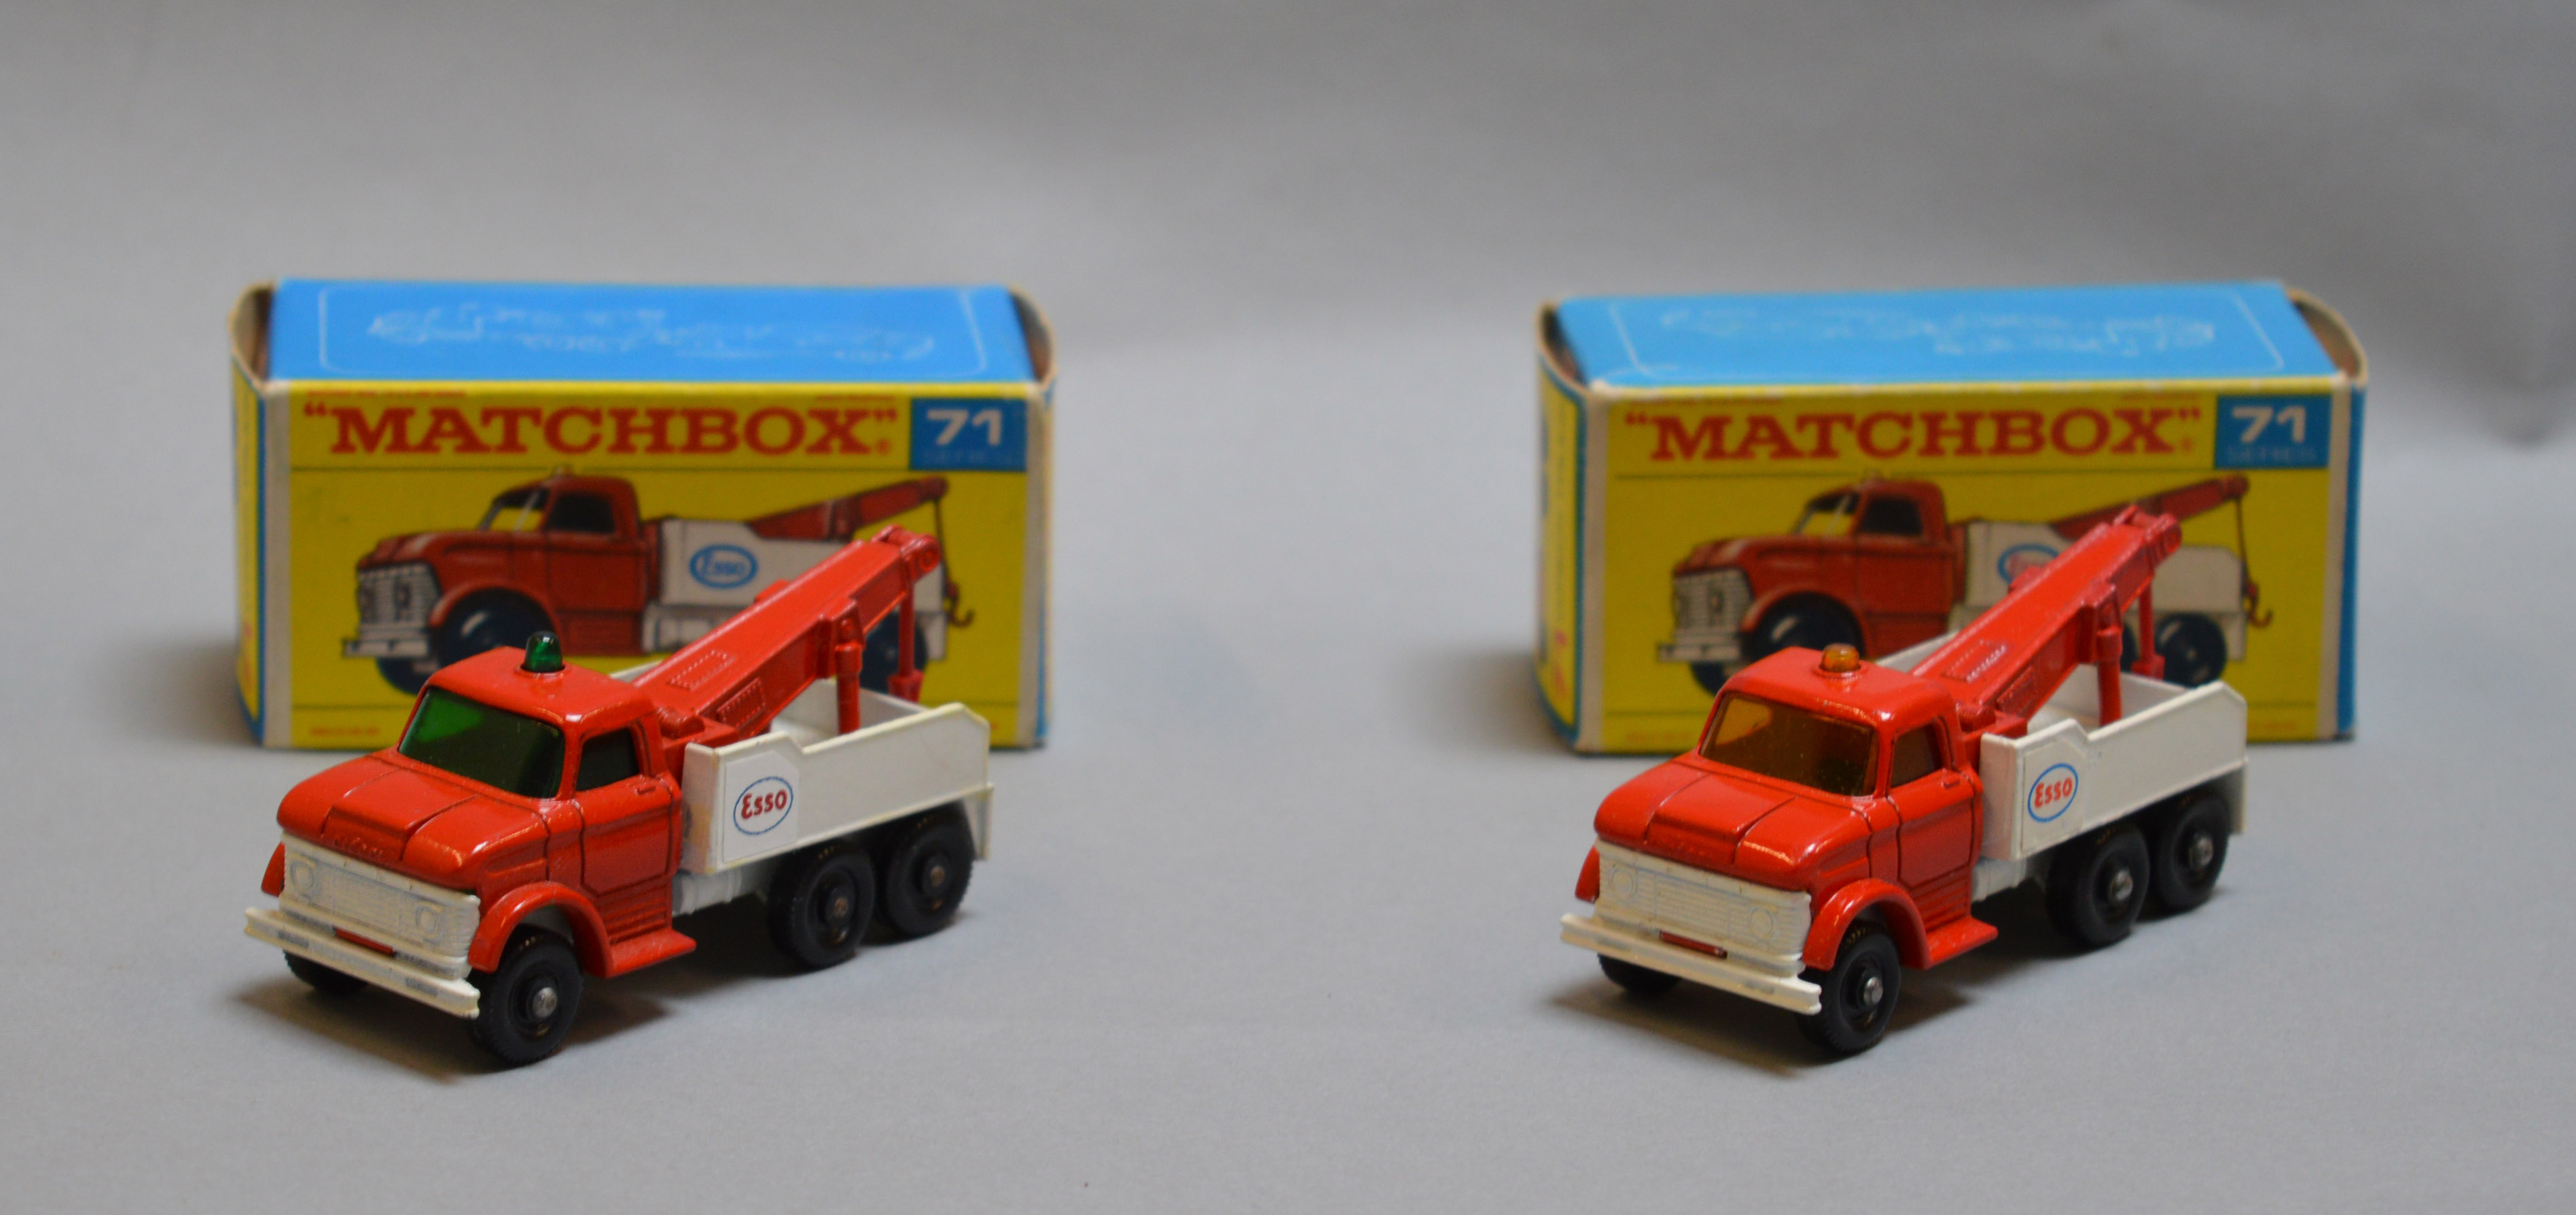 2 Lesney Matchbox Series No. 71 Ford Heavy Wreck Truck's with Esso livery.